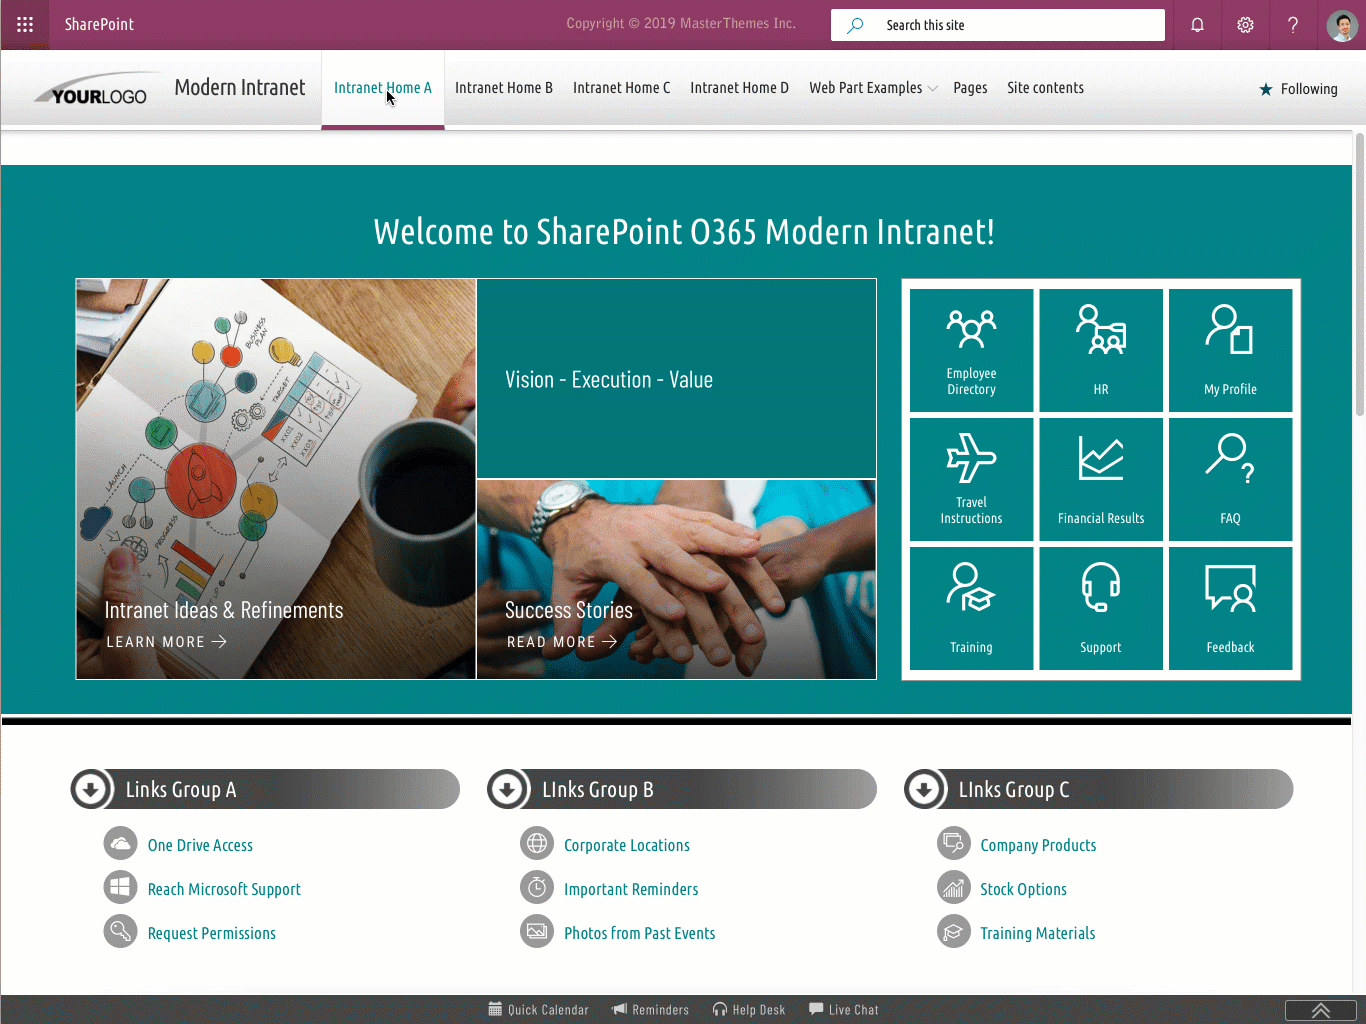 Take a tour of our theming solutions and templates for modern SharePoint Online, Office 365, and SharePoint On-Premises. Learn more about sharepoint, sharepoint online, modern sharepoint, sharepoint o365, sharepoint office365, intranet templates, sharepoint intranet templates, office365, sharepoint site designs, sharepoint templates, sharepoint themes, modern templates, communication templates, modern themes, SPFx templates, sharepoint 2019 themes, custom themes, templates, responsive themes, responsive design, theme, themes, custom themes, masterpage, masterpages, master pages, sharepoint layouts, and sharepoint branding.